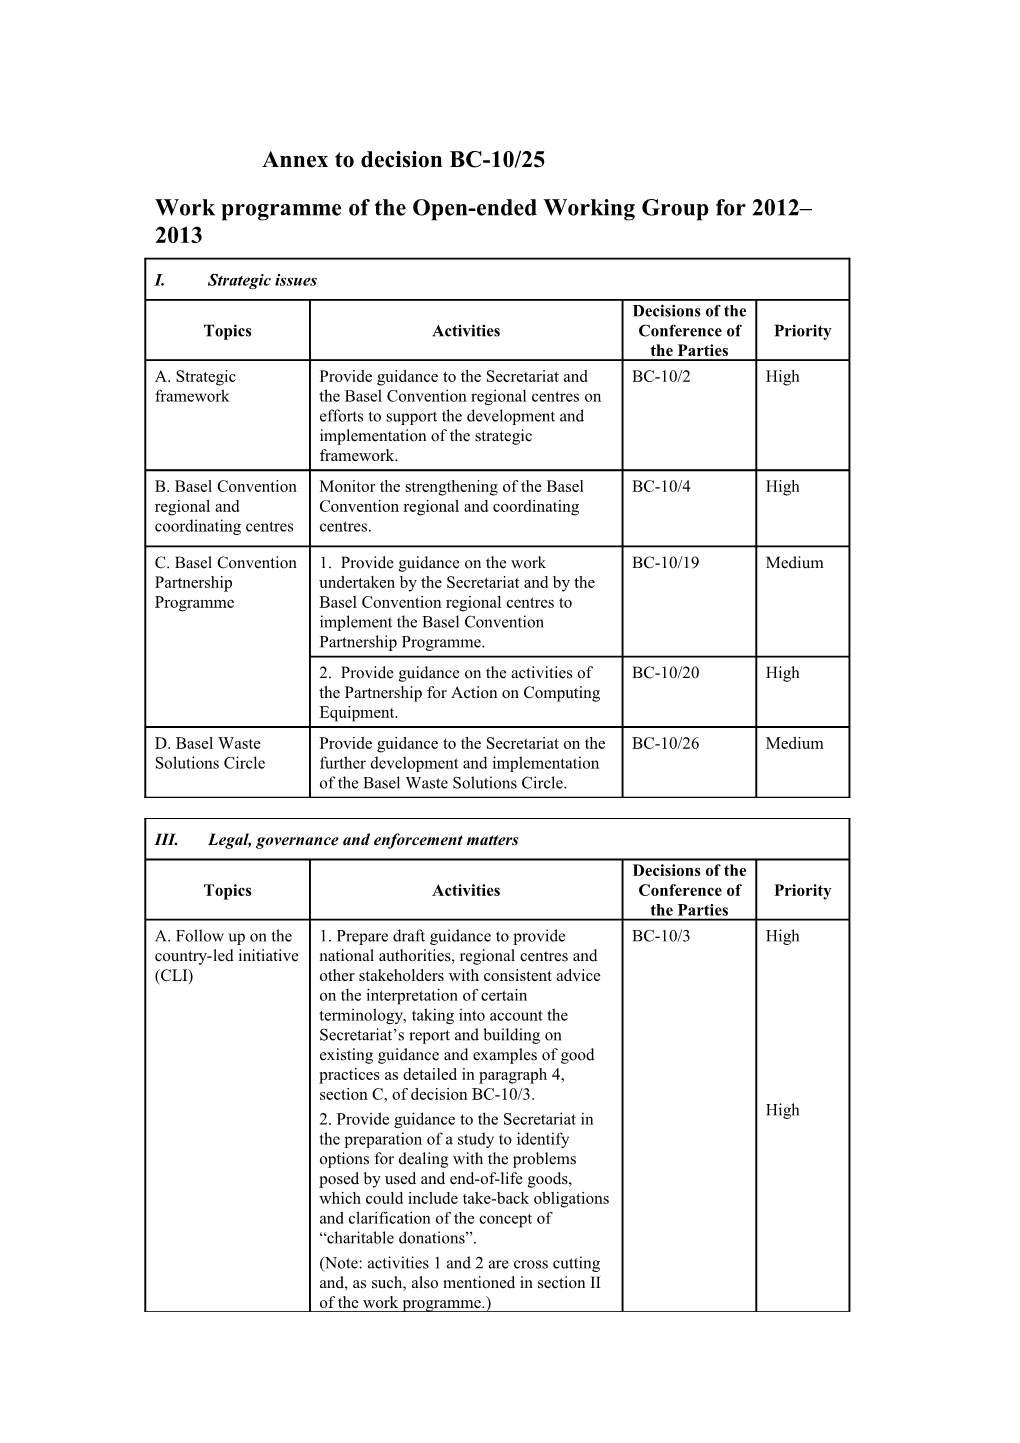 BC-10/25: Work Programme of the Open-Ended Working Group for 2012 2013